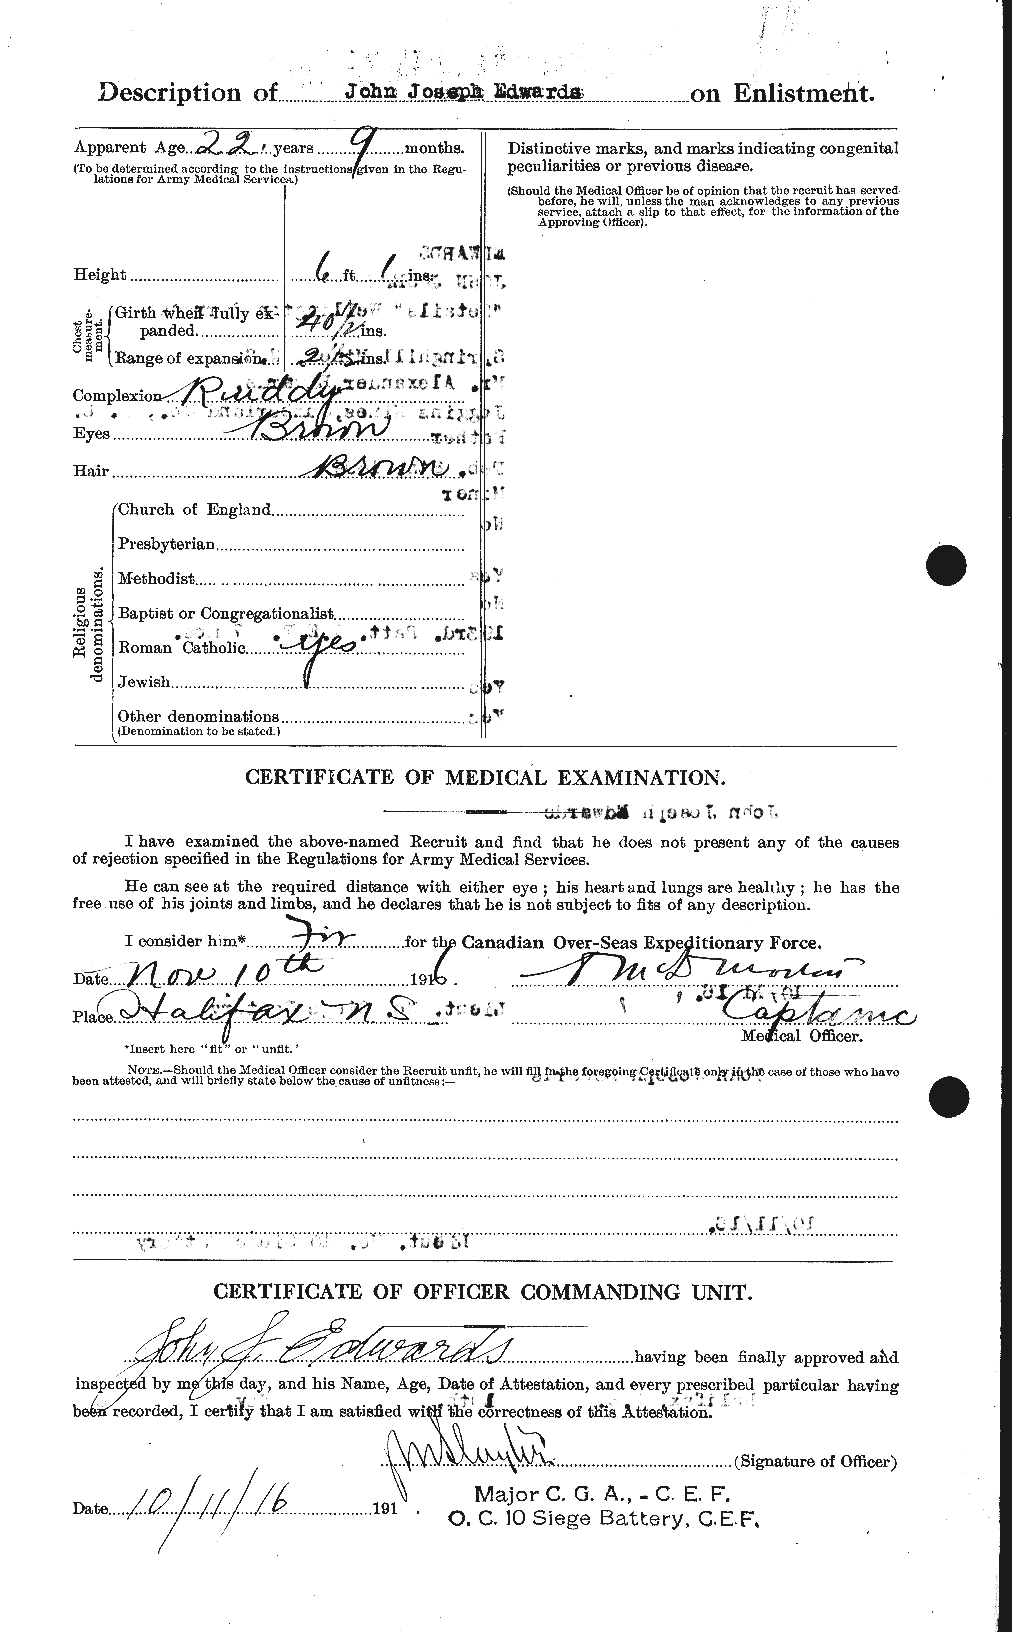 Personnel Records of the First World War - CEF 310143b